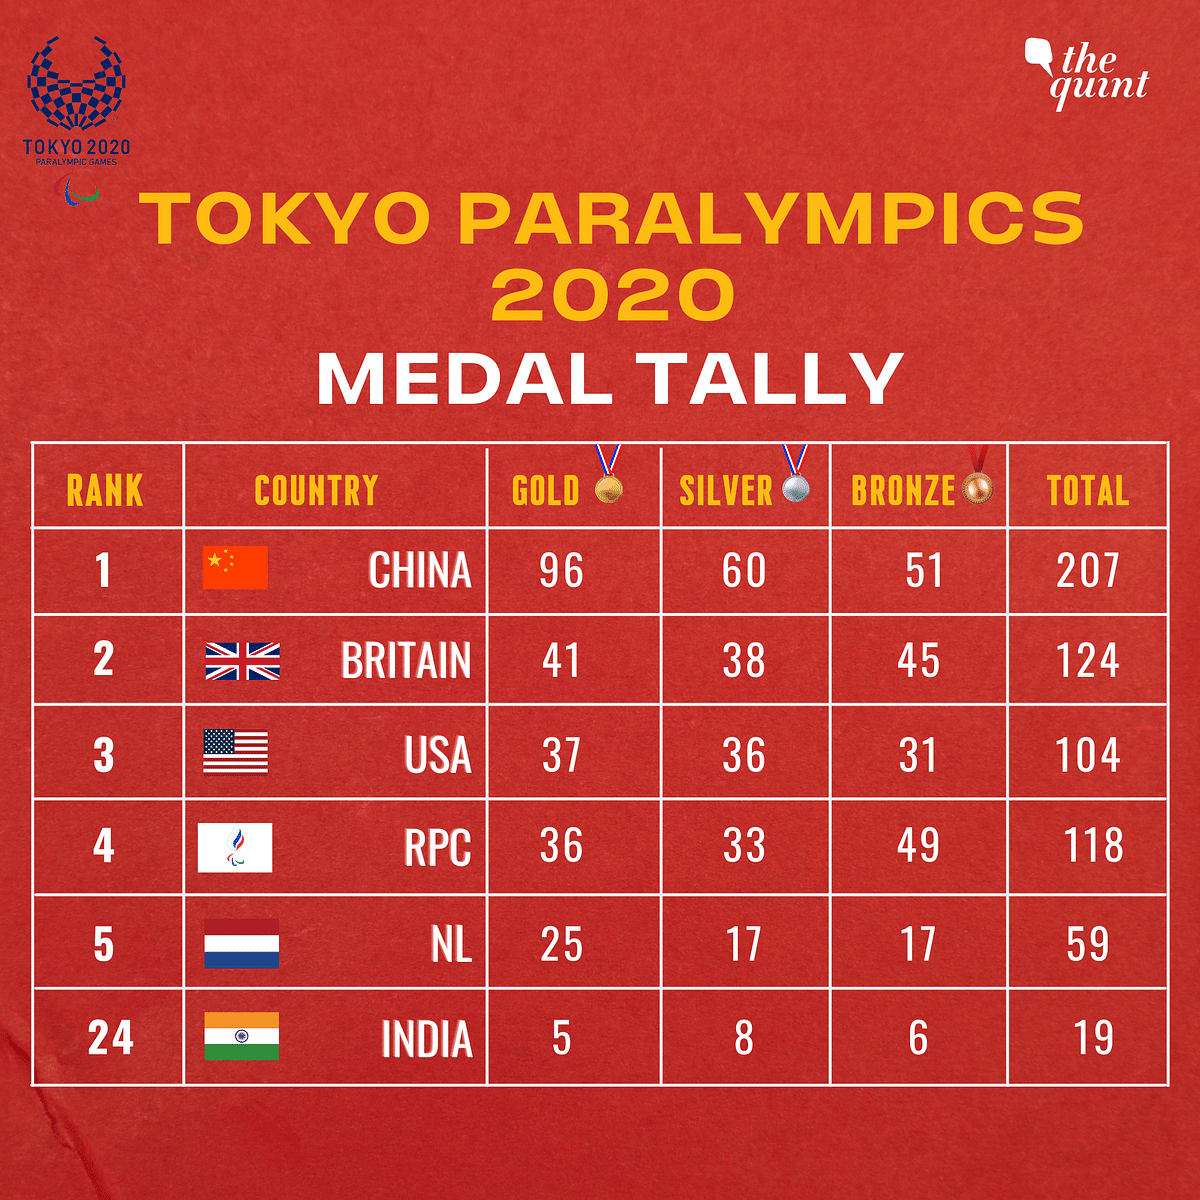 India won two medals in badminton on the final day of the 2020 Tokyo Paralympics.